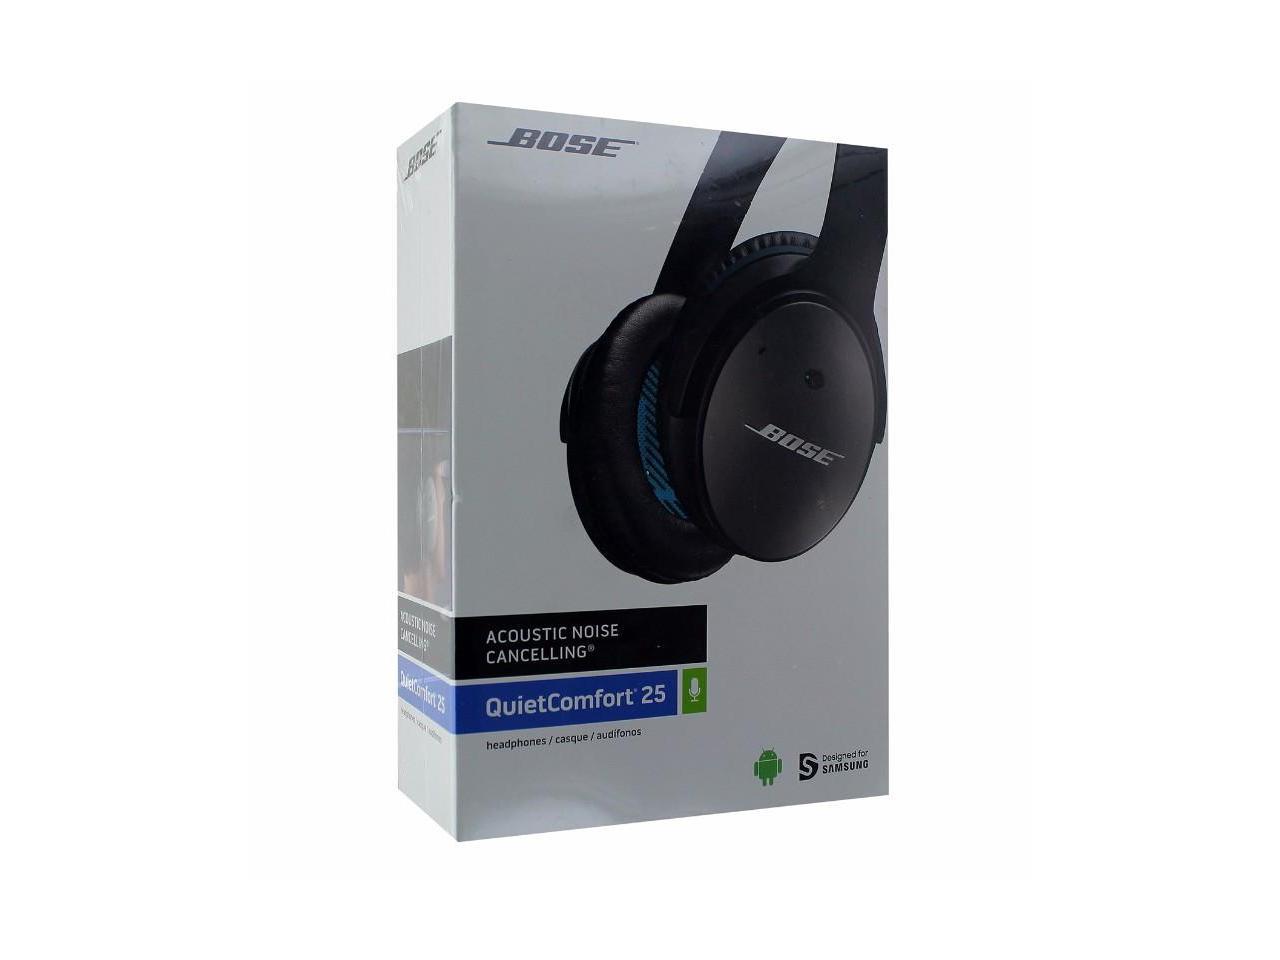 Bose Quiet Comfort 25 Acoustic Noise Cancelling Headphones Black Samsung Android Devices Newegg Com